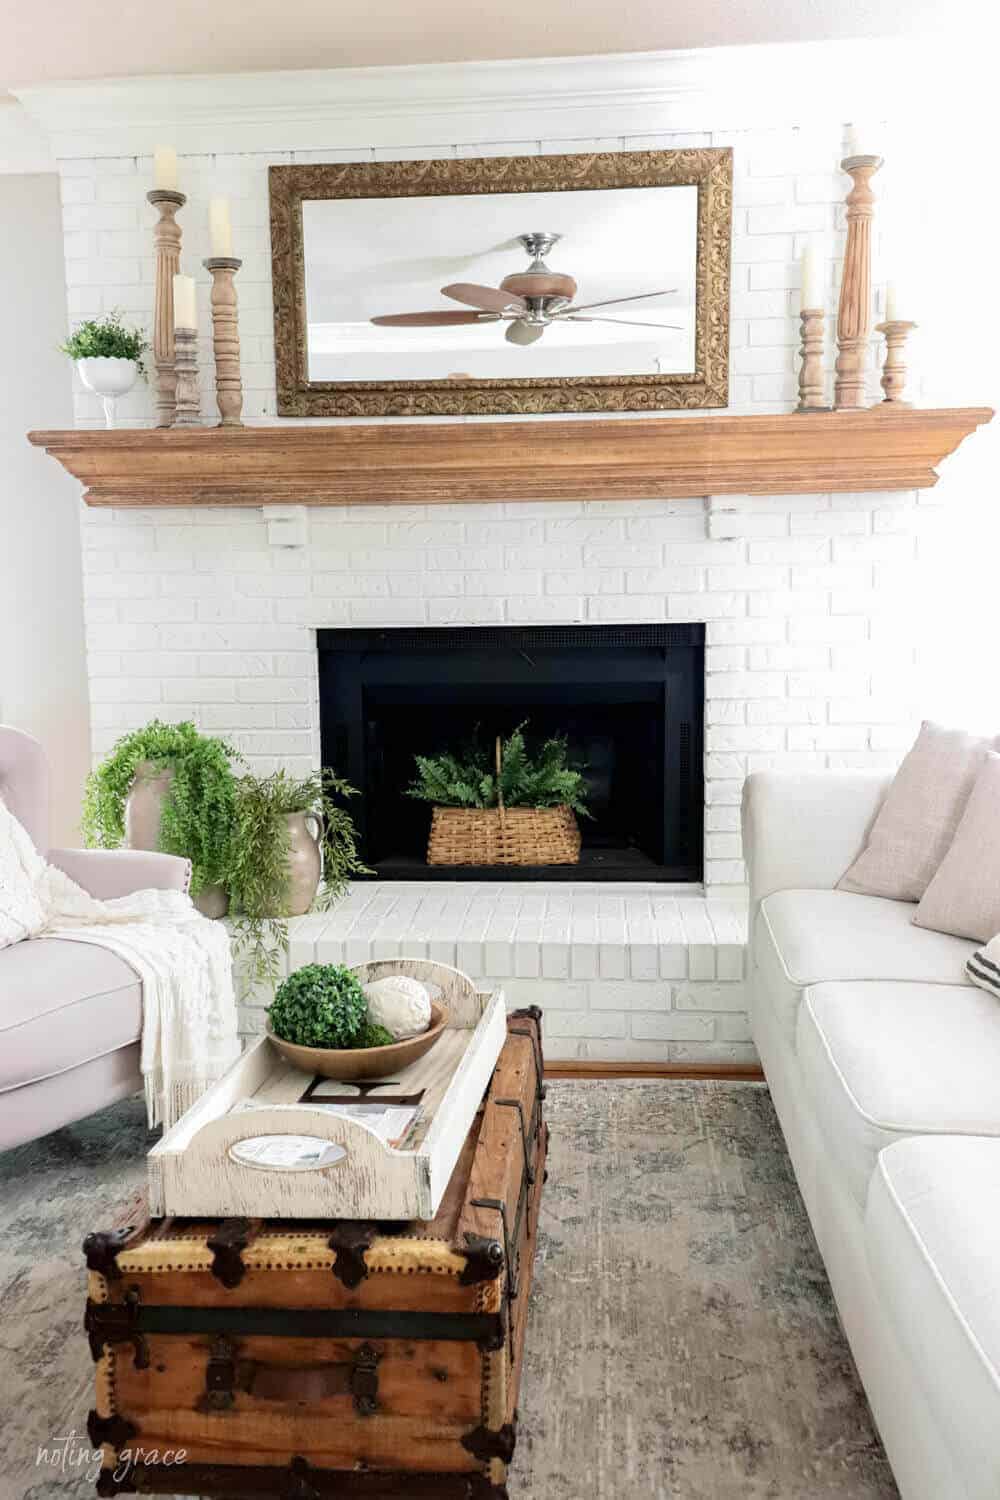 white painted brick fireplace with natural wood mantel and wooden candlesticks